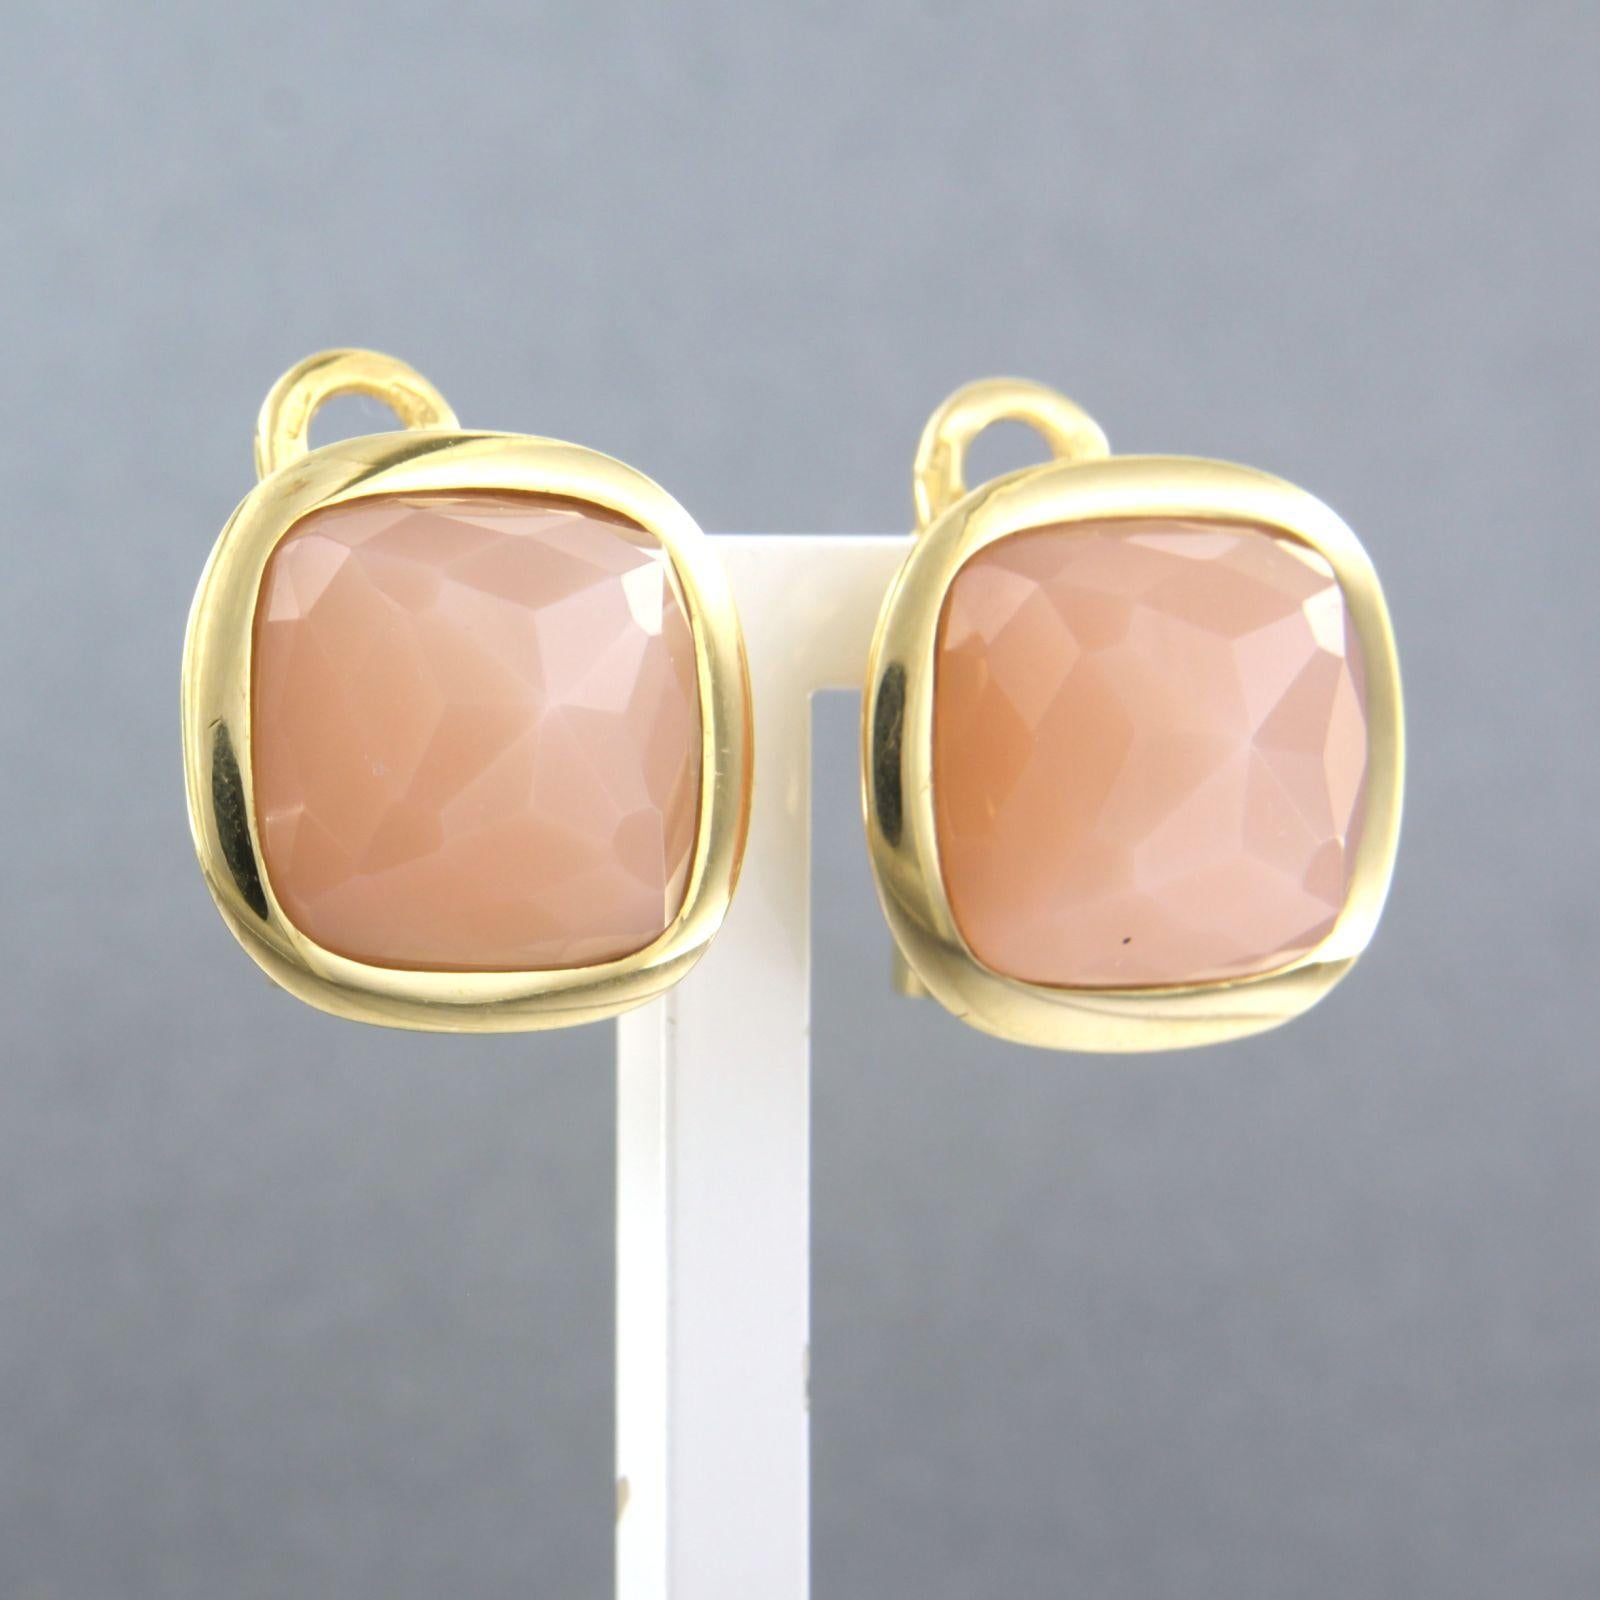 Modern 18k yellow gold ear clips set with pink quartz - size 1.8 cm x 1.8 cm For Sale